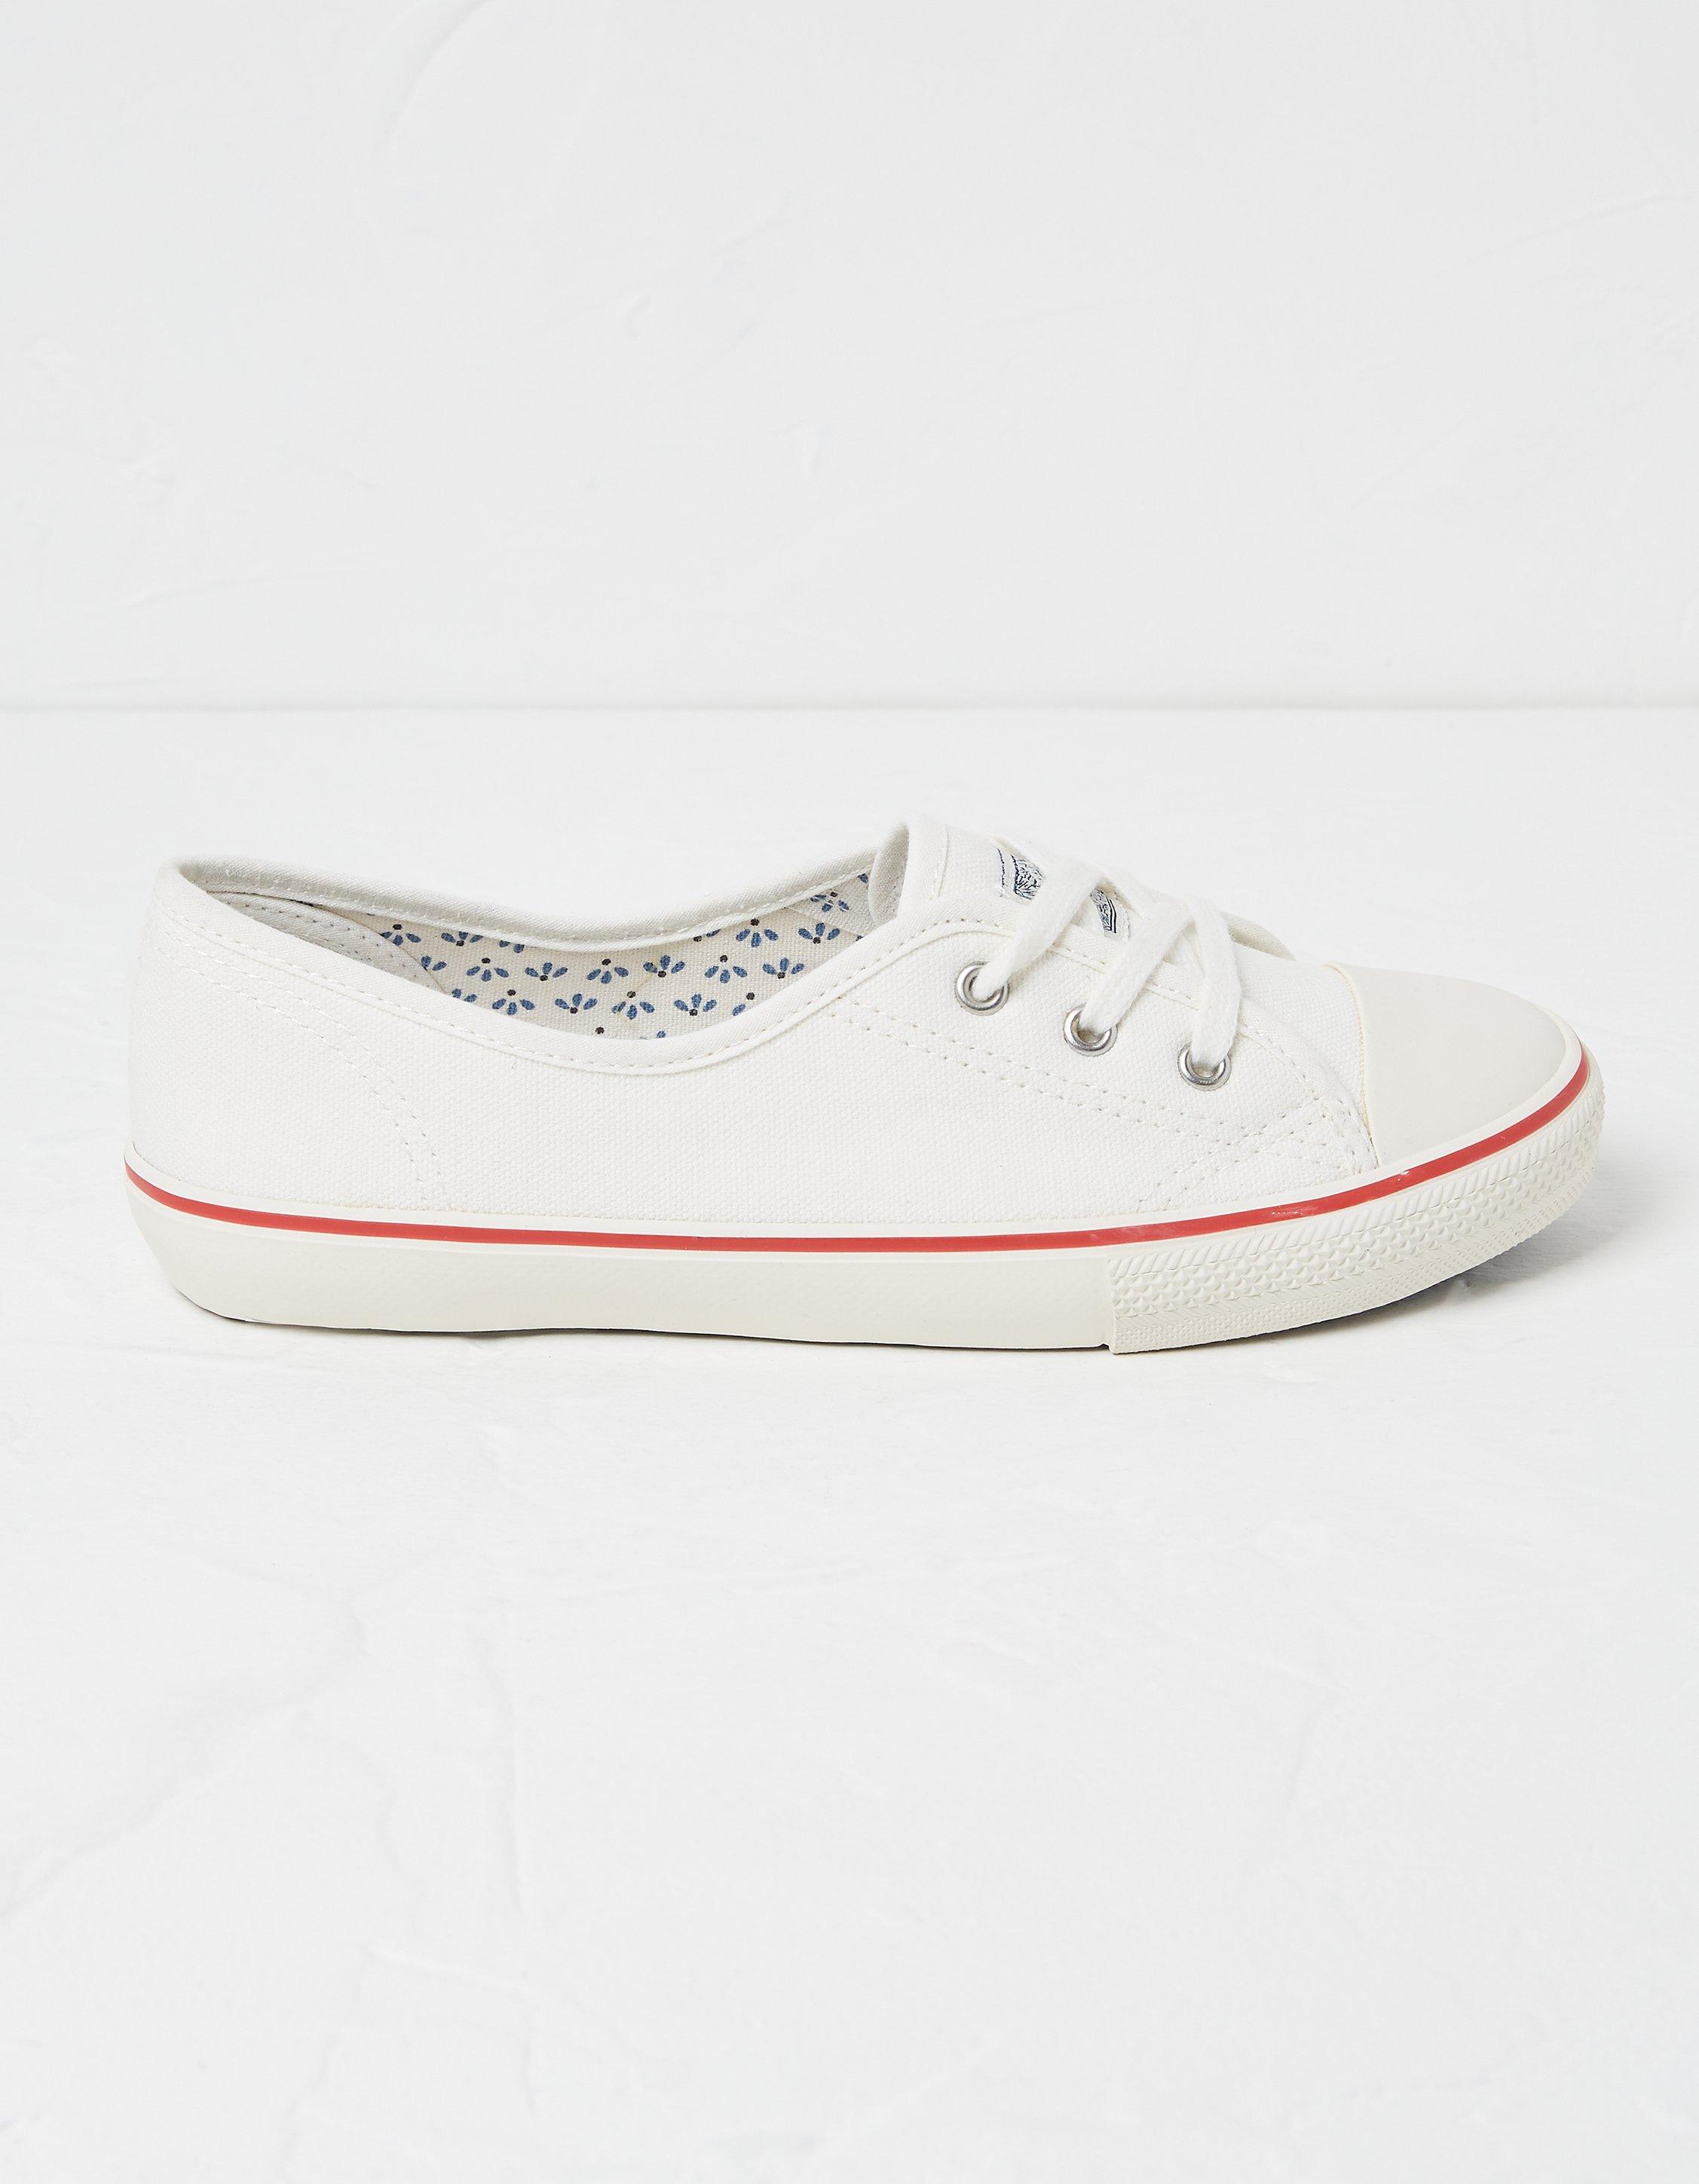 Drama tage ned Perth White Ballet Sneakers, Sneakers | FatFace.com